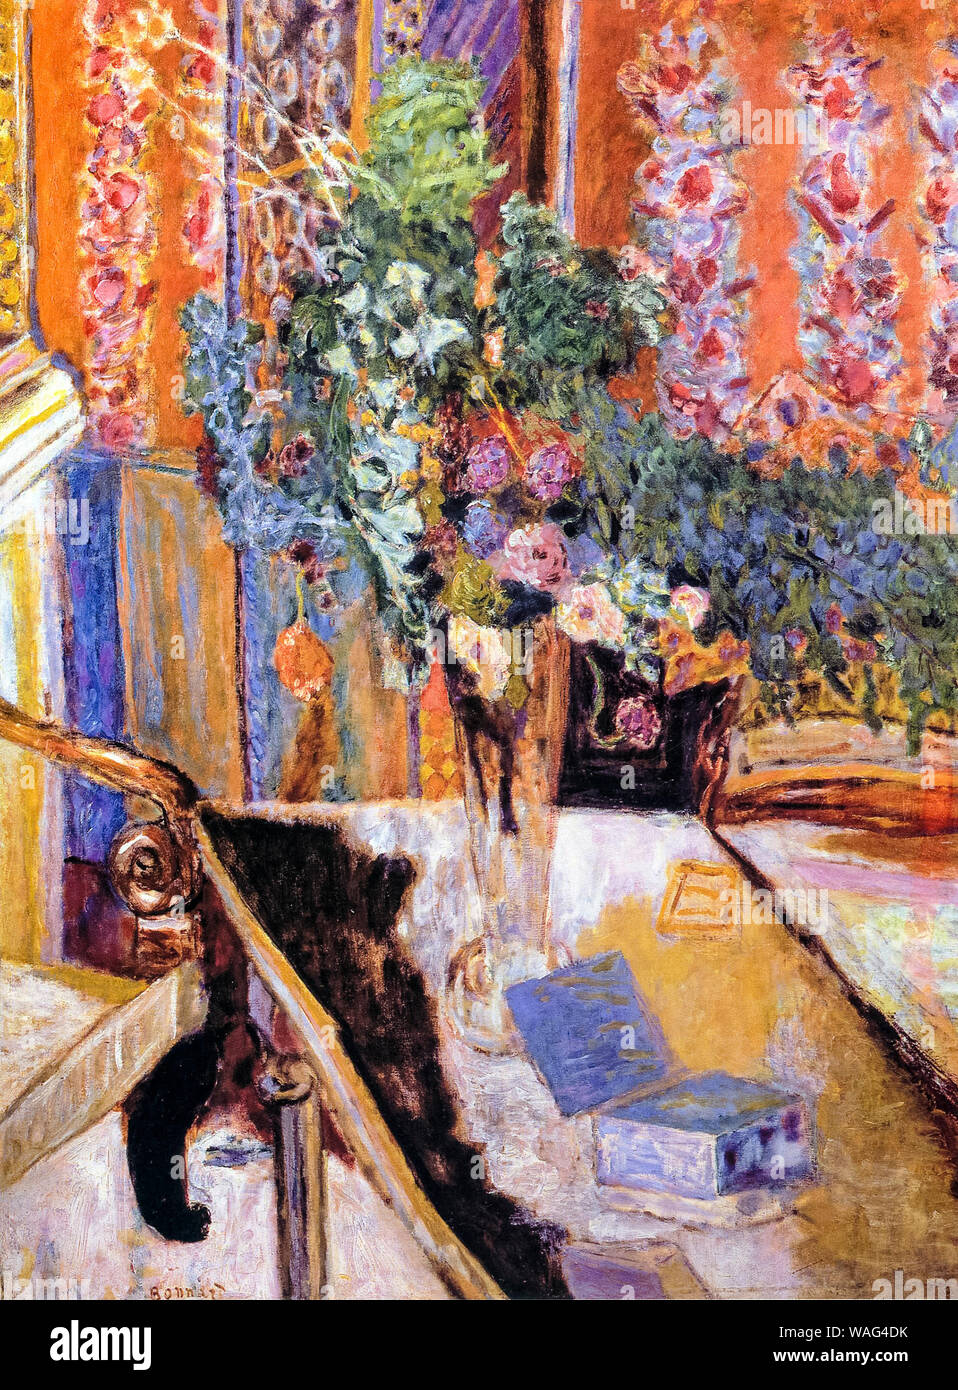 Pierre Bonnard, Interior with flowers, still life painting, 1919 Stock Photo